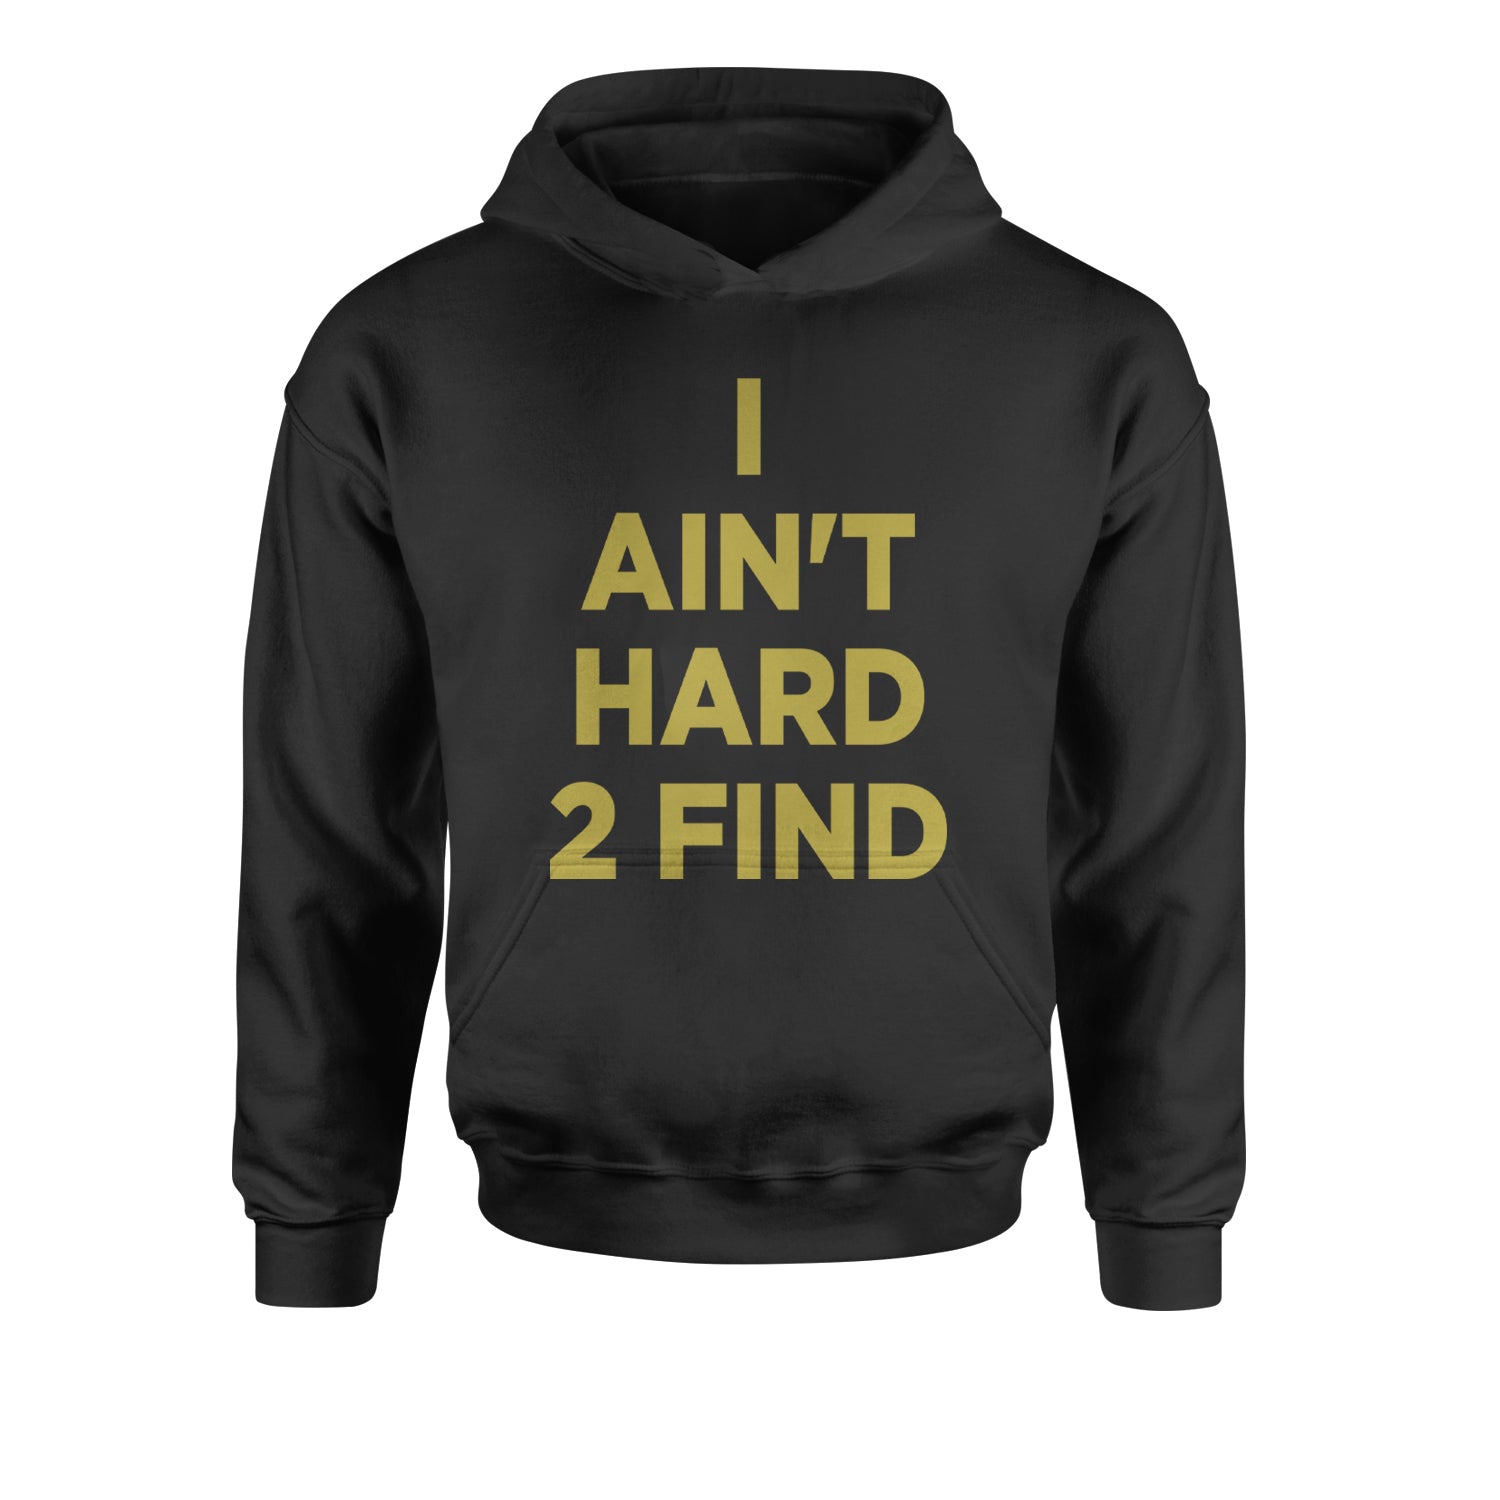 I Ain't Hard To Find Coach Prime Youth-Sized Hoodie